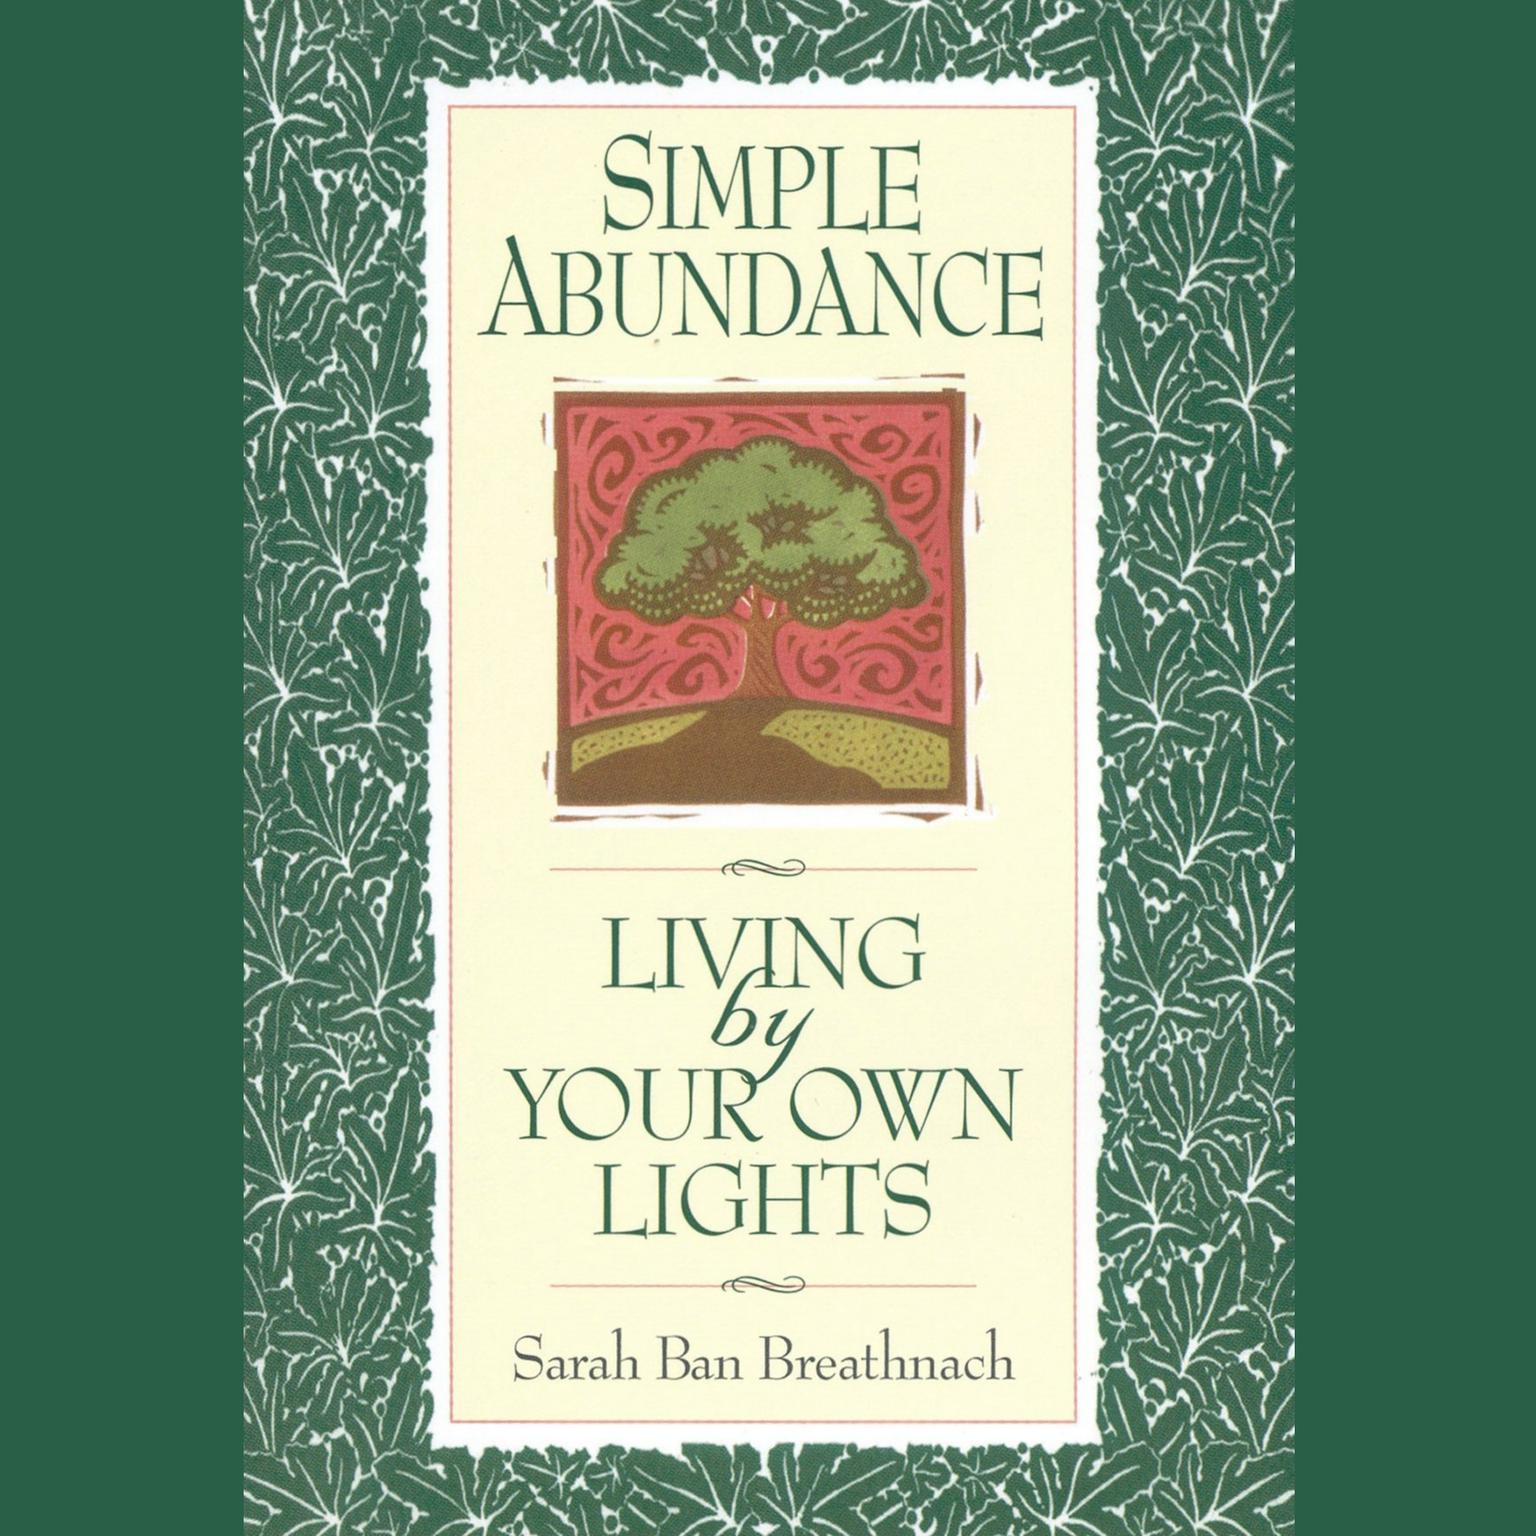 Simple Abundance (Abridged): Living by Your Own Lights Audiobook, by Sarah Ban Breathnach